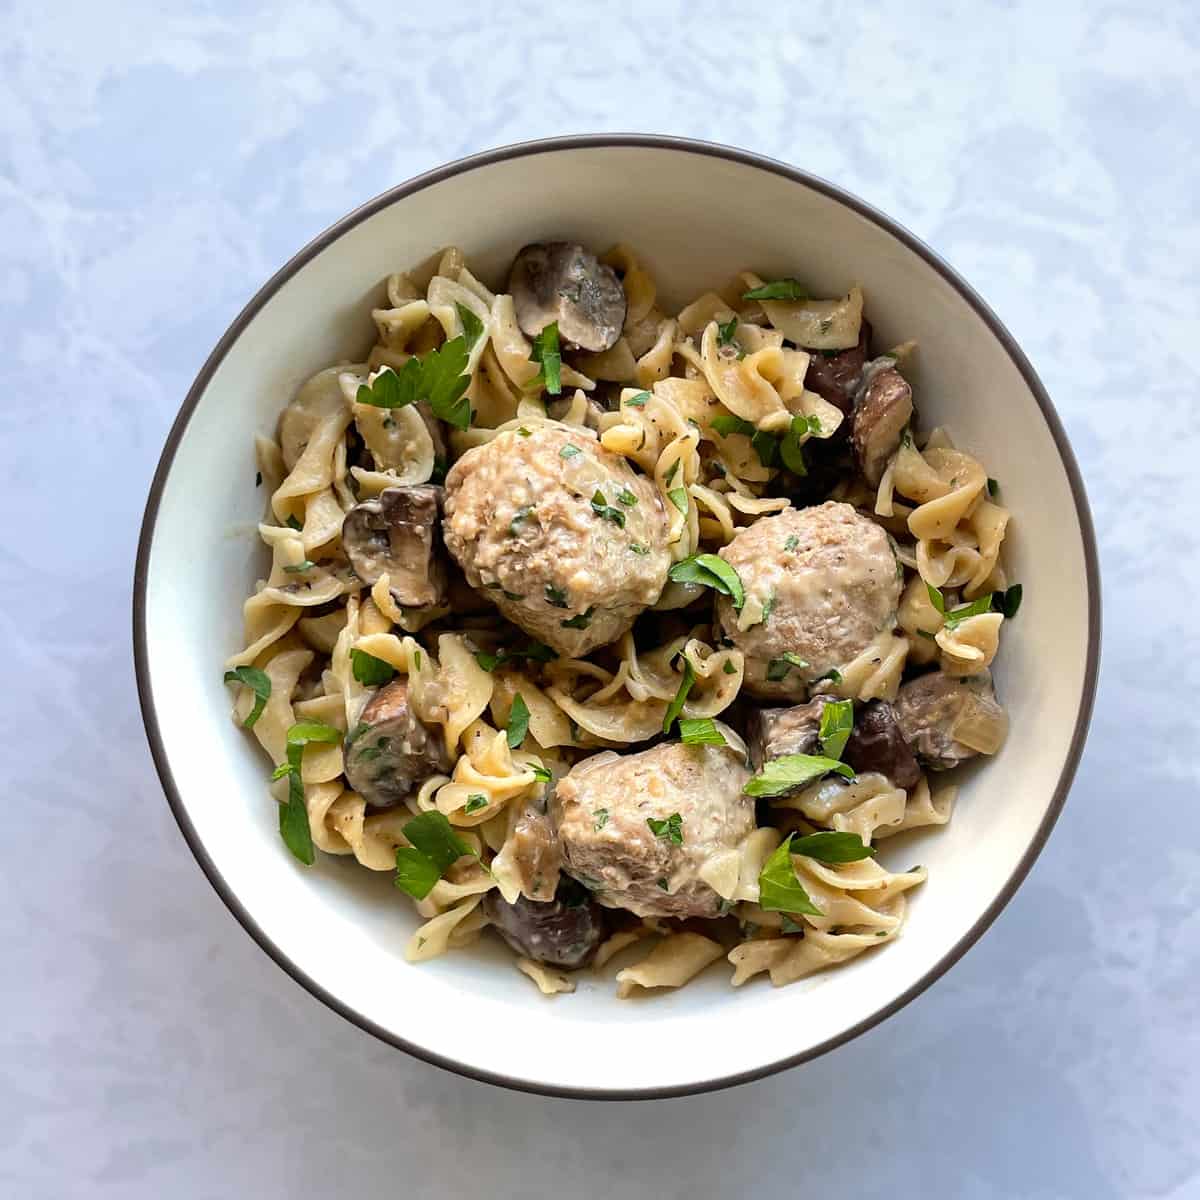 bowl of turkey meatballs over egg noodles, mushrooms, and parsley.    